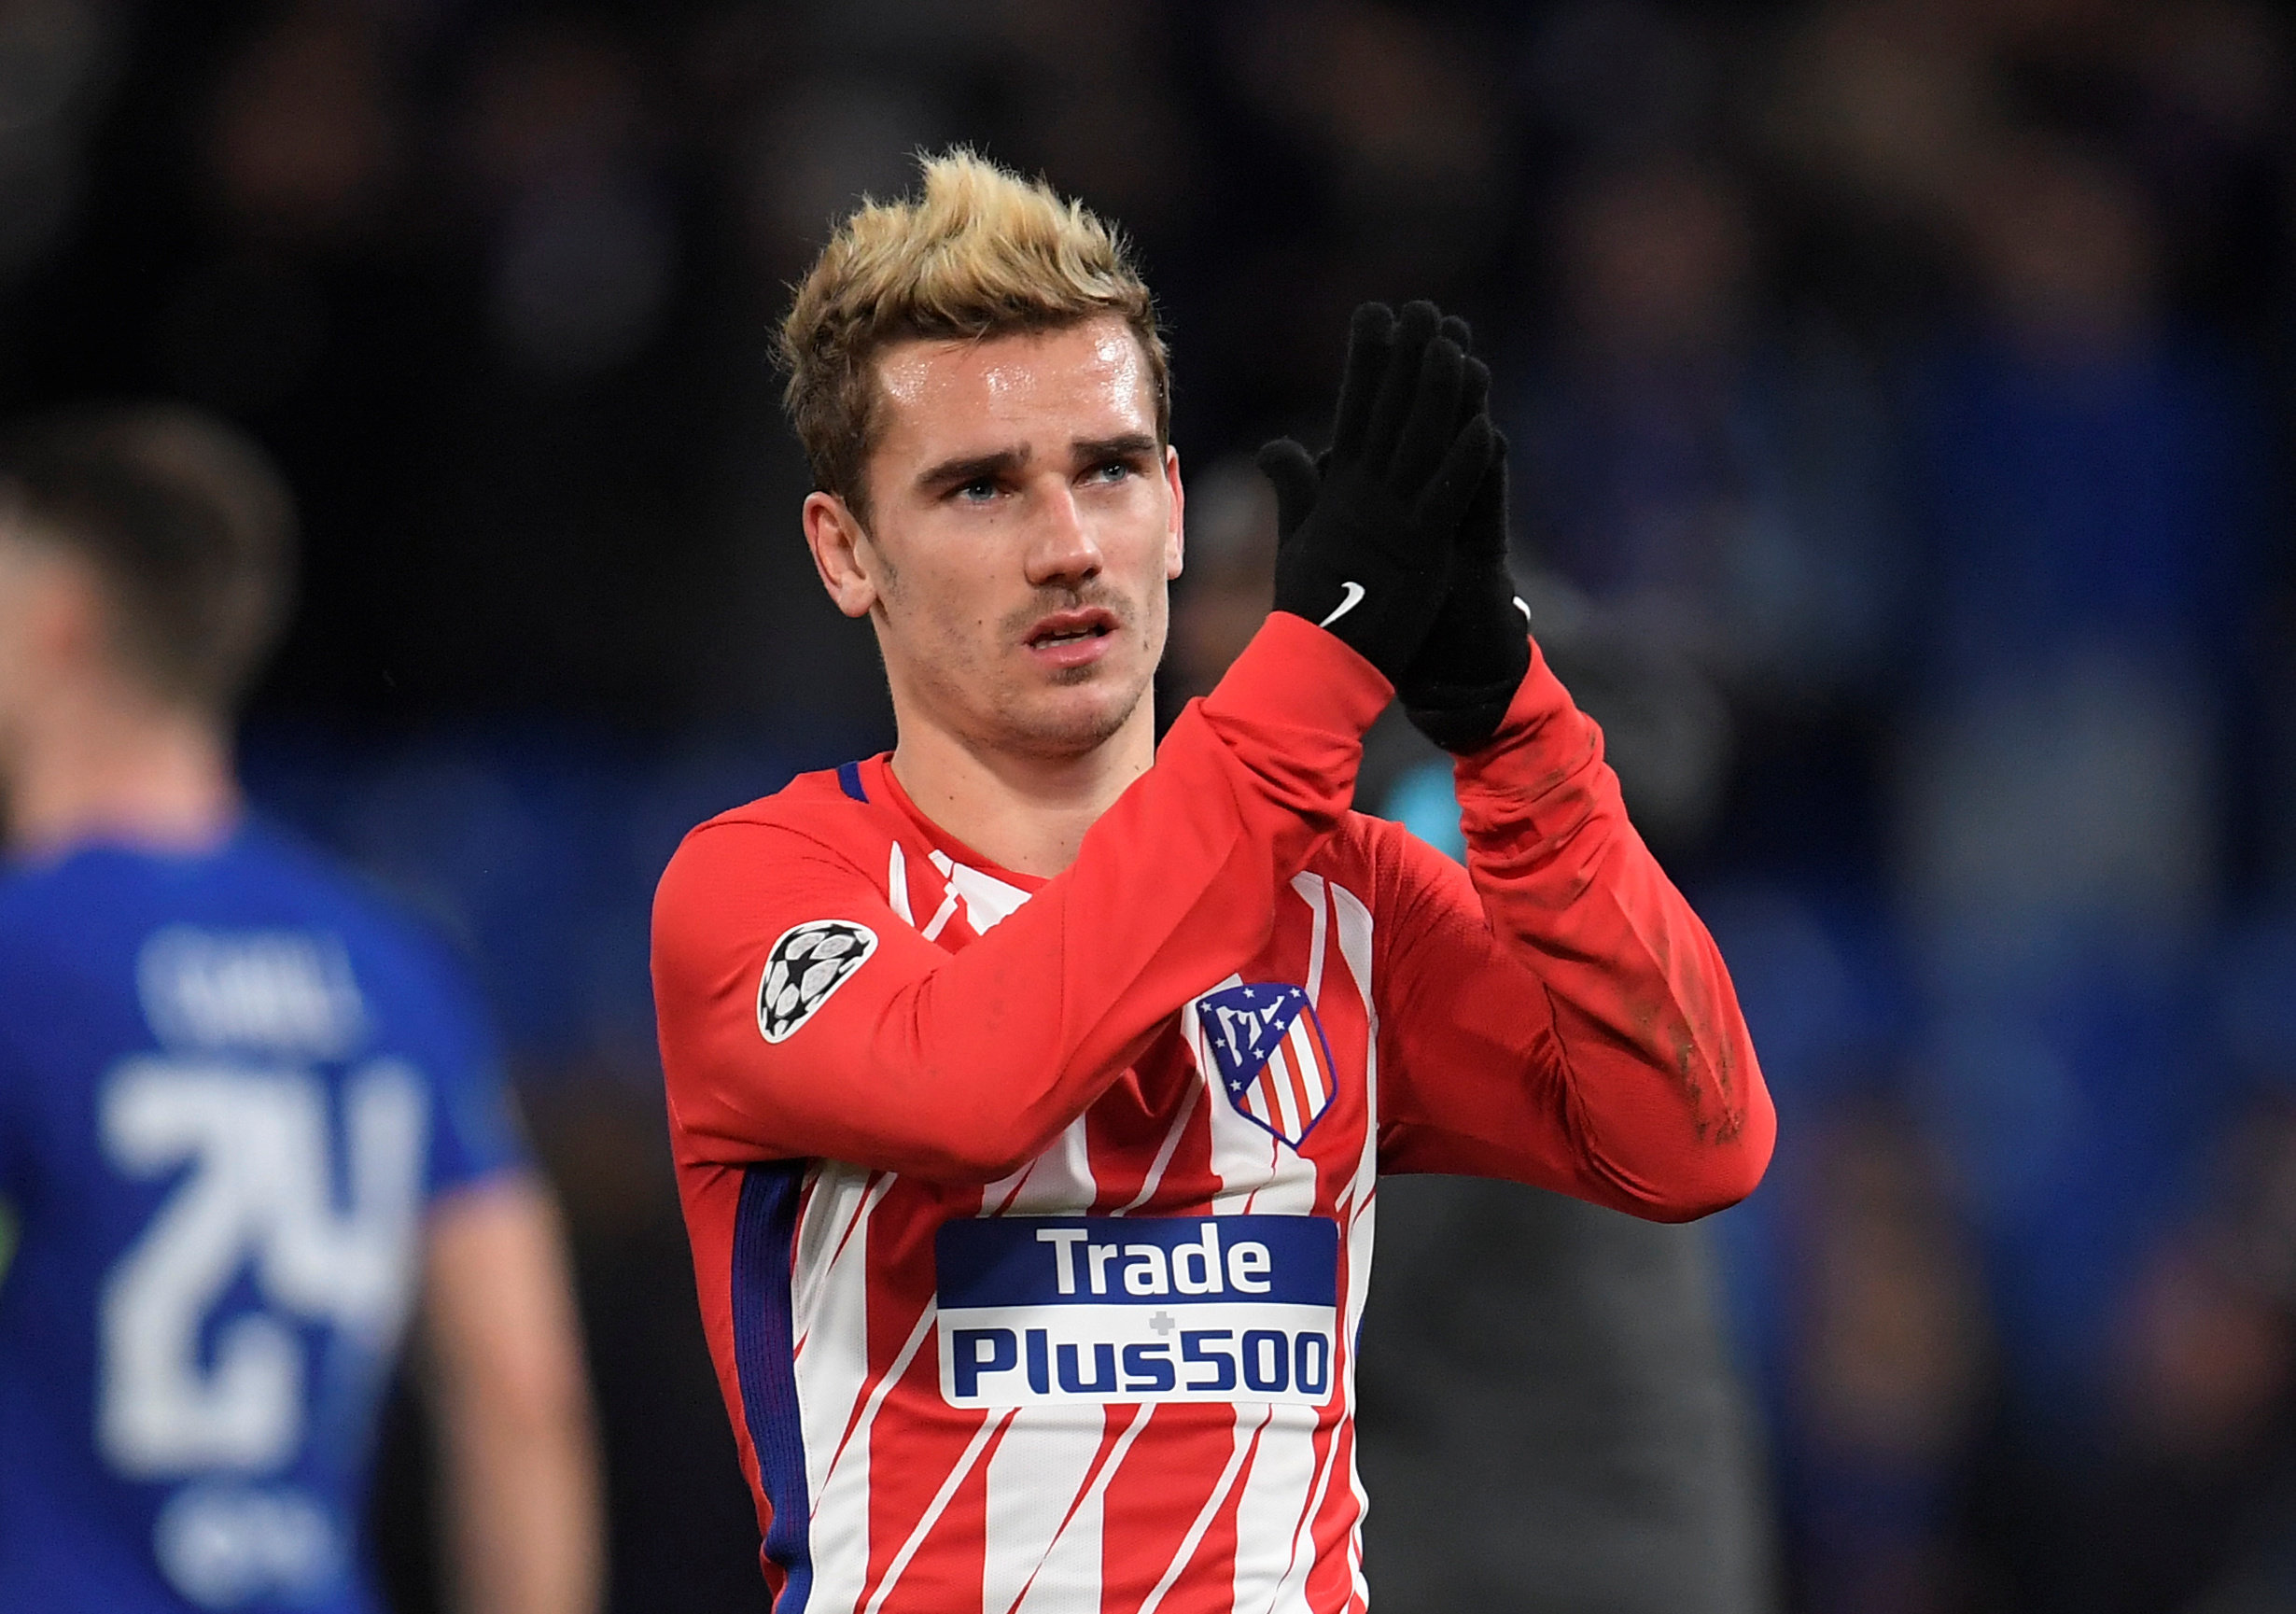 <strong>Antoine Griezmann at Chelsea vs Atletico Madrid at Stamford Bridge on 5 December&nbsp;</strong>